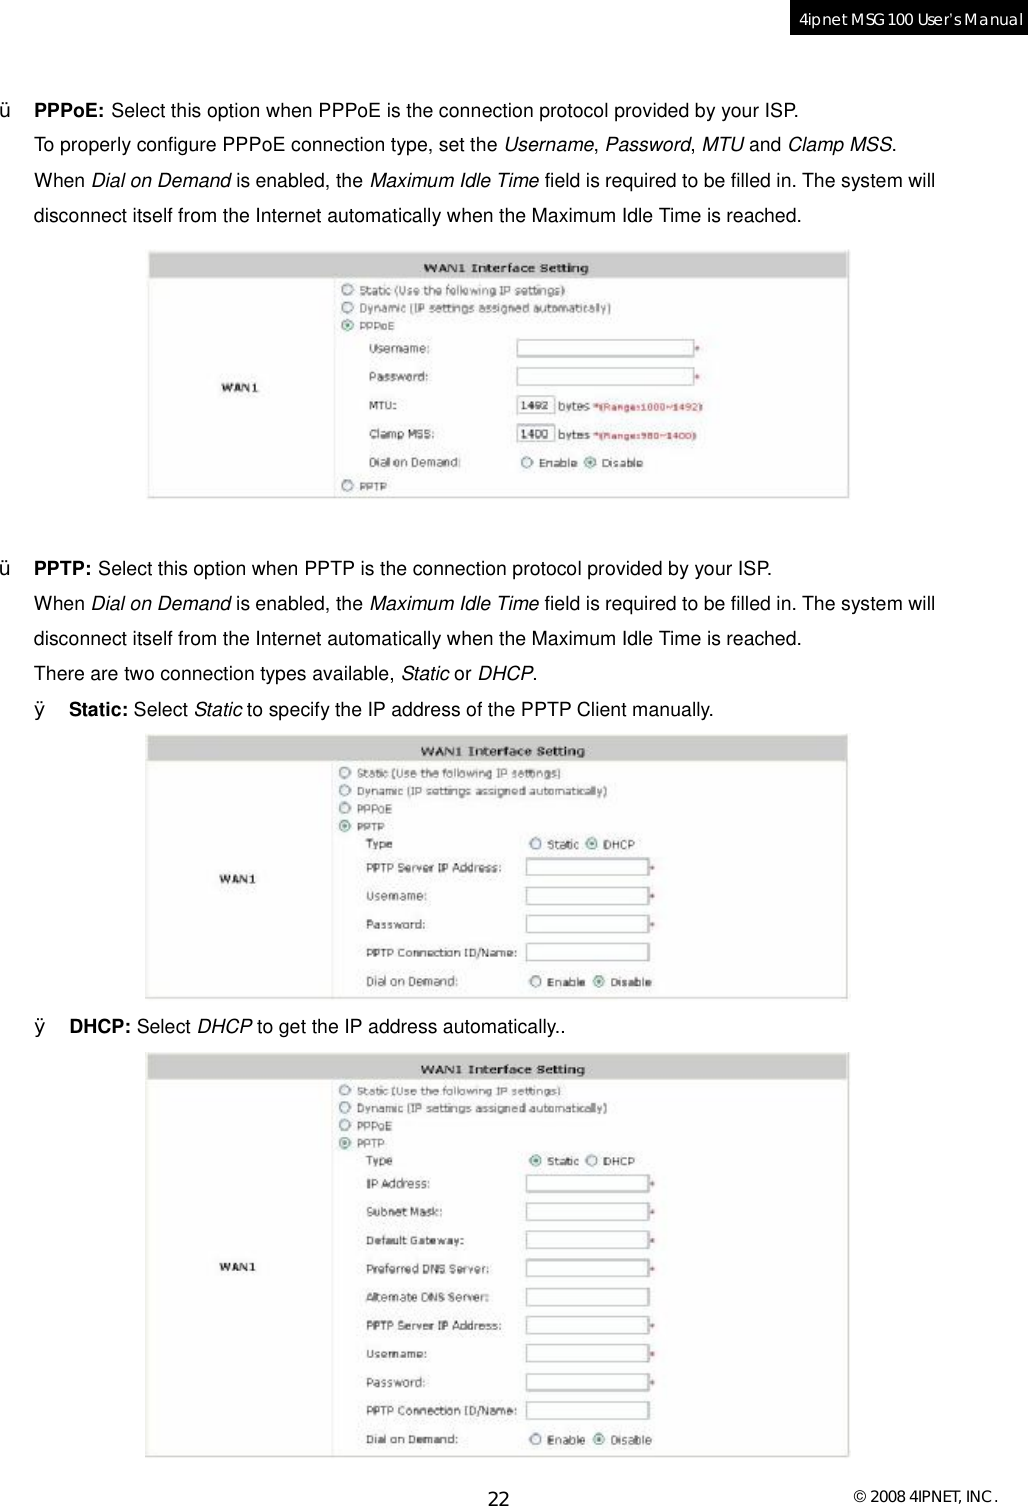  © 2008 4IPNET, INC. 22 4ipnet MSG100 User’s Manual   Ÿ PPPoE: Select this option when PPPoE is the connection protocol provided by your ISP.  To properly configure PPPoE connection type, set the Username, Password, MTU and Clamp MSS.  When Dial on Demand is enabled, the Maximum Idle Time field is required to be filled in. The system will disconnect itself from the Internet automatically when the Maximum Idle Time is reached.    Ÿ PPTP: Select this option when PPTP is the connection protocol provided by your ISP.  When Dial on Demand is enabled, the Maximum Idle Time field is required to be filled in. The system will disconnect itself from the Internet automatically when the Maximum Idle Time is reached. There are two connection types available, Static or DHCP.  Ø Static: Select Static to specify the IP address of the PPTP Client manually.  Ø DHCP: Select DHCP to get the IP address automatically..  